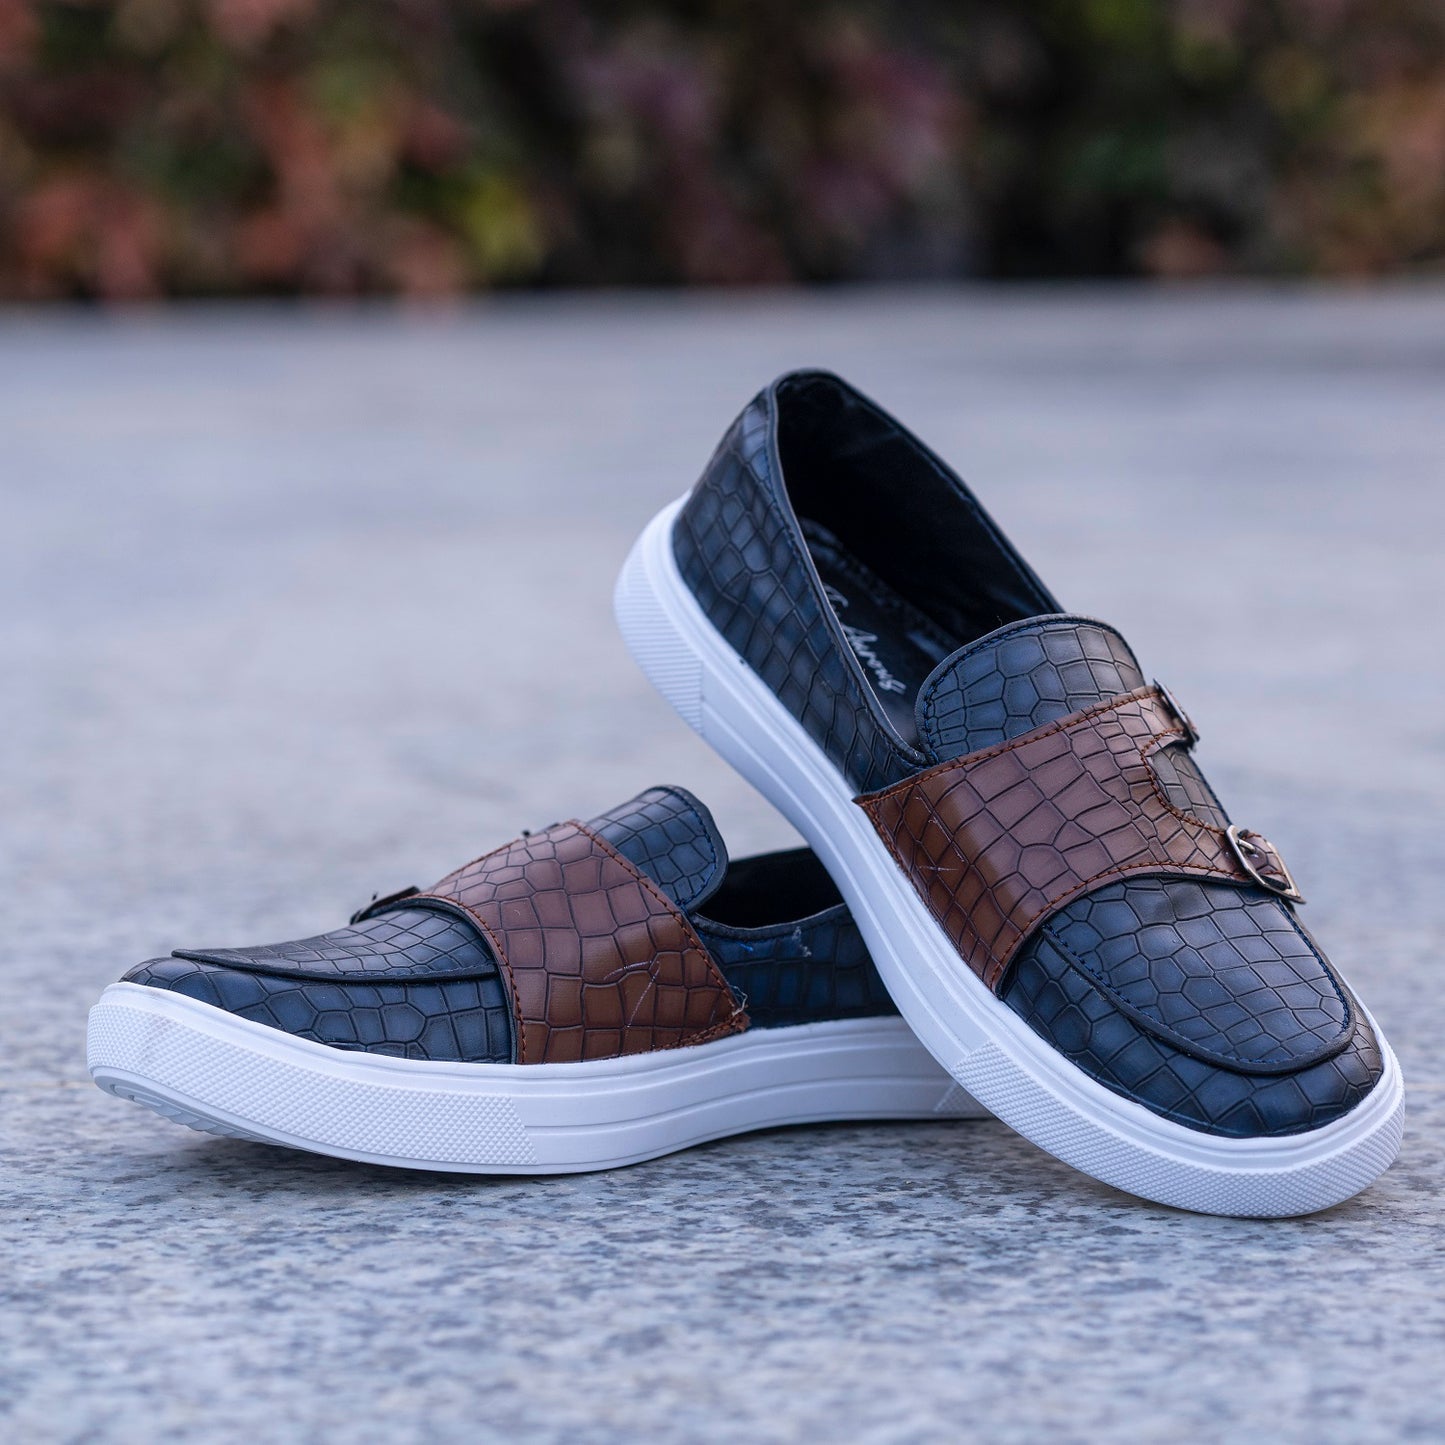 The Aurous Ivy Slip On Loafers